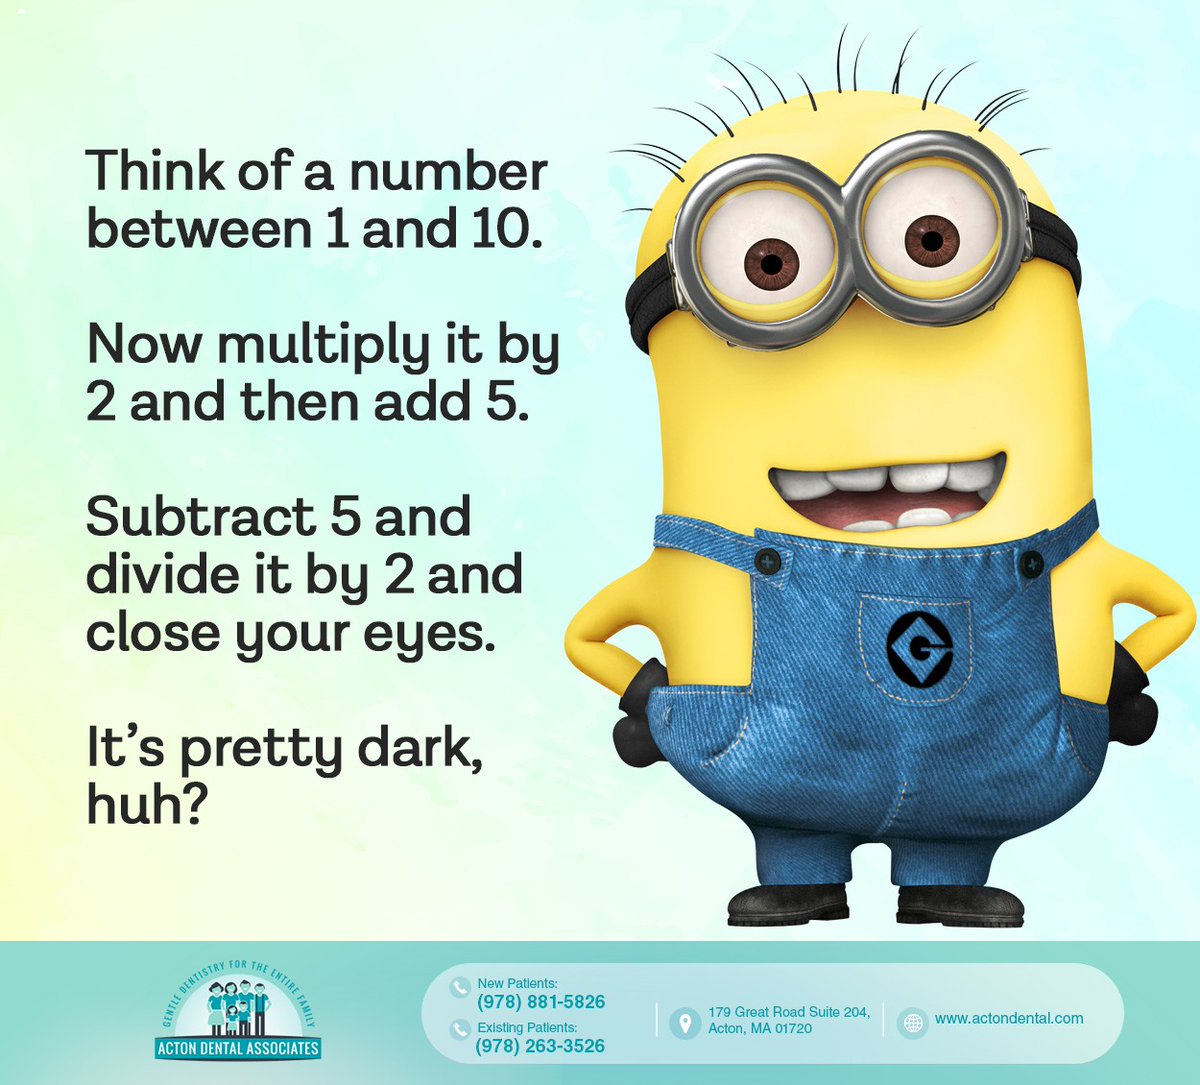 Whoa, this totally works. Finally, a math riddle even we can manage.
#justforfun #funriddle #actondentalassociates #acton #MA